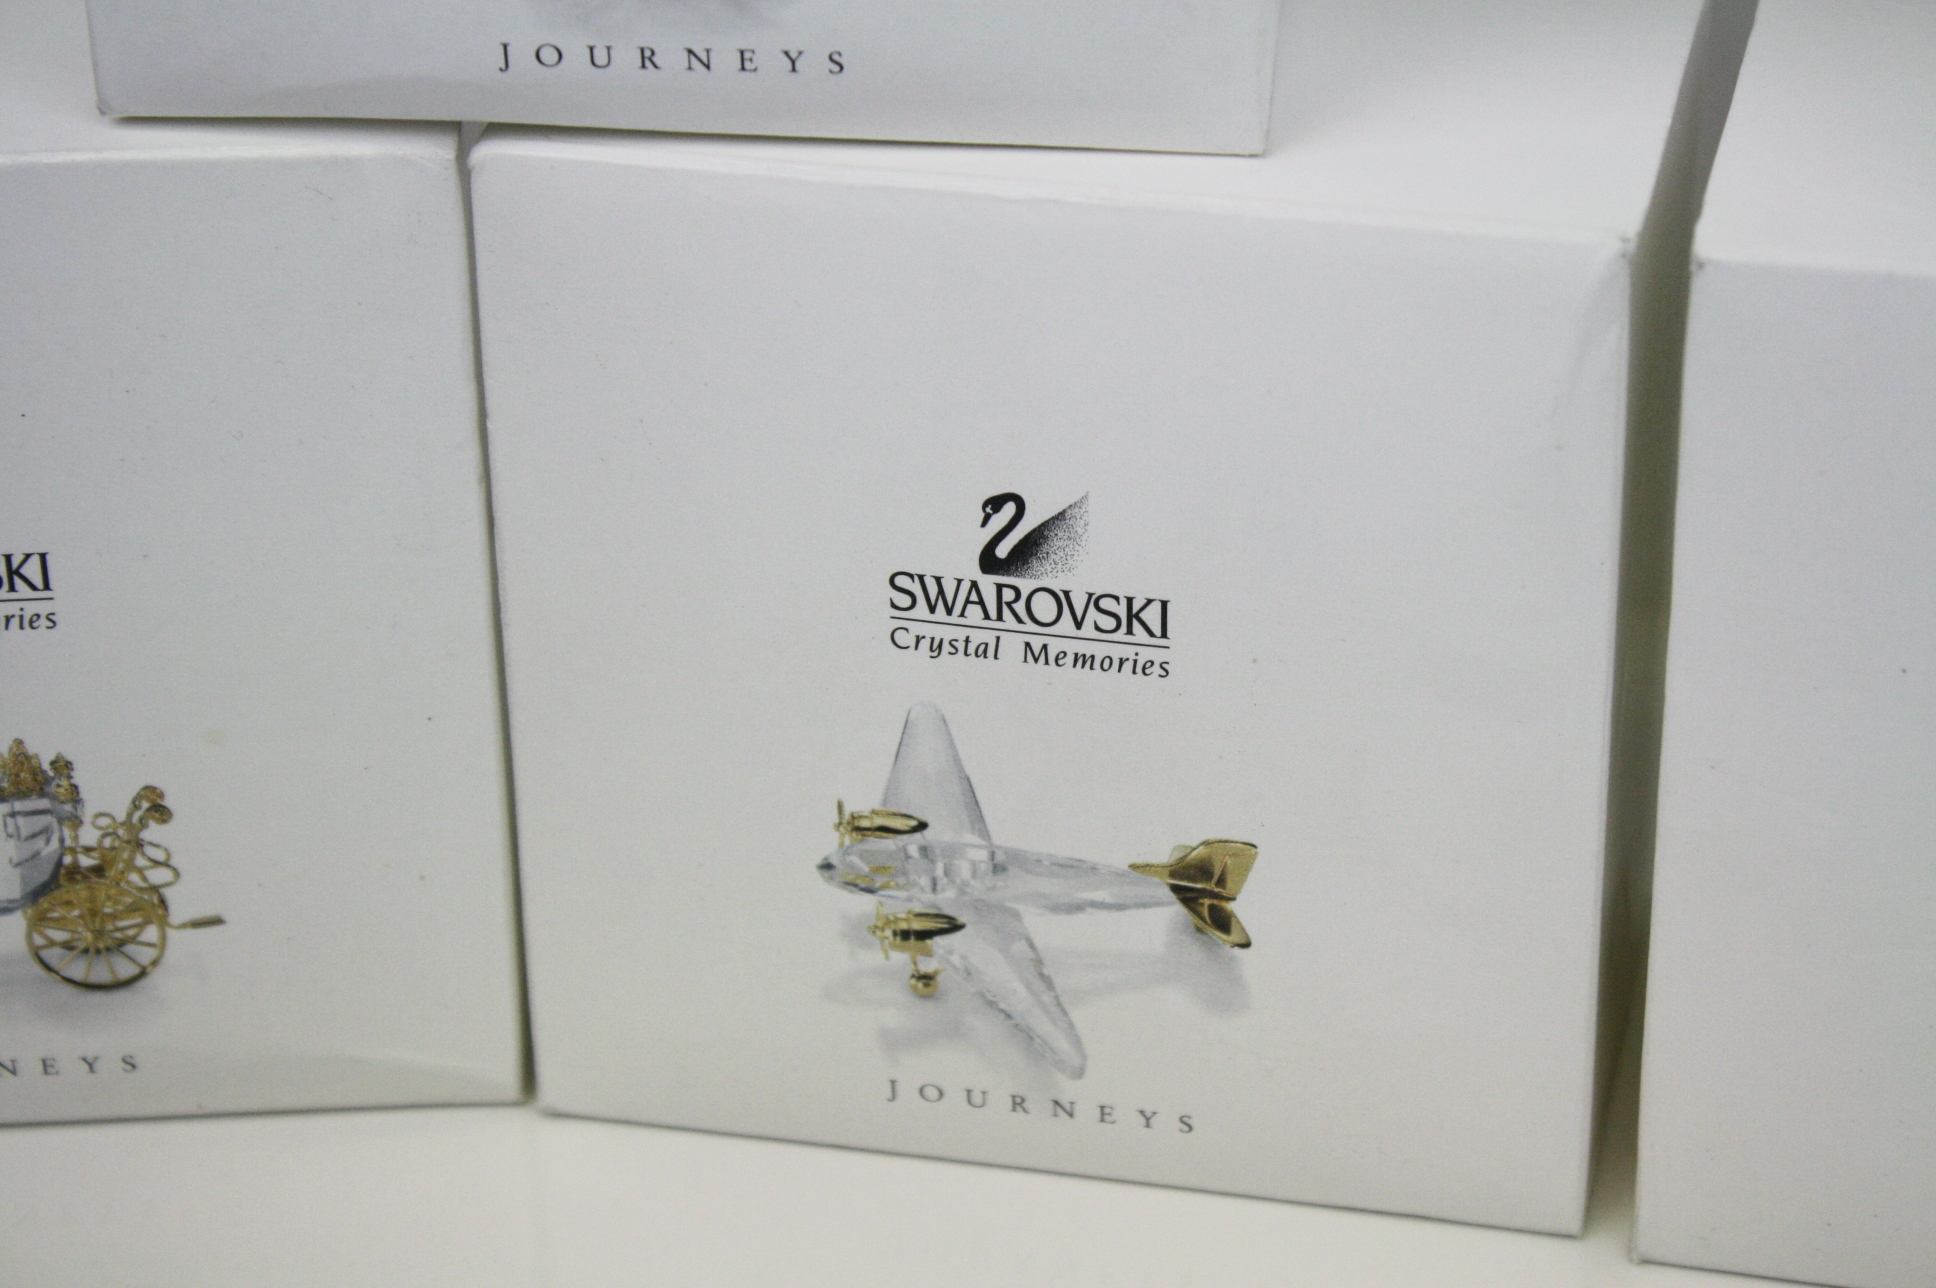 Collection of six Swarovski crystal memories 'Journeys' in gold with original boxes - Image 6 of 8